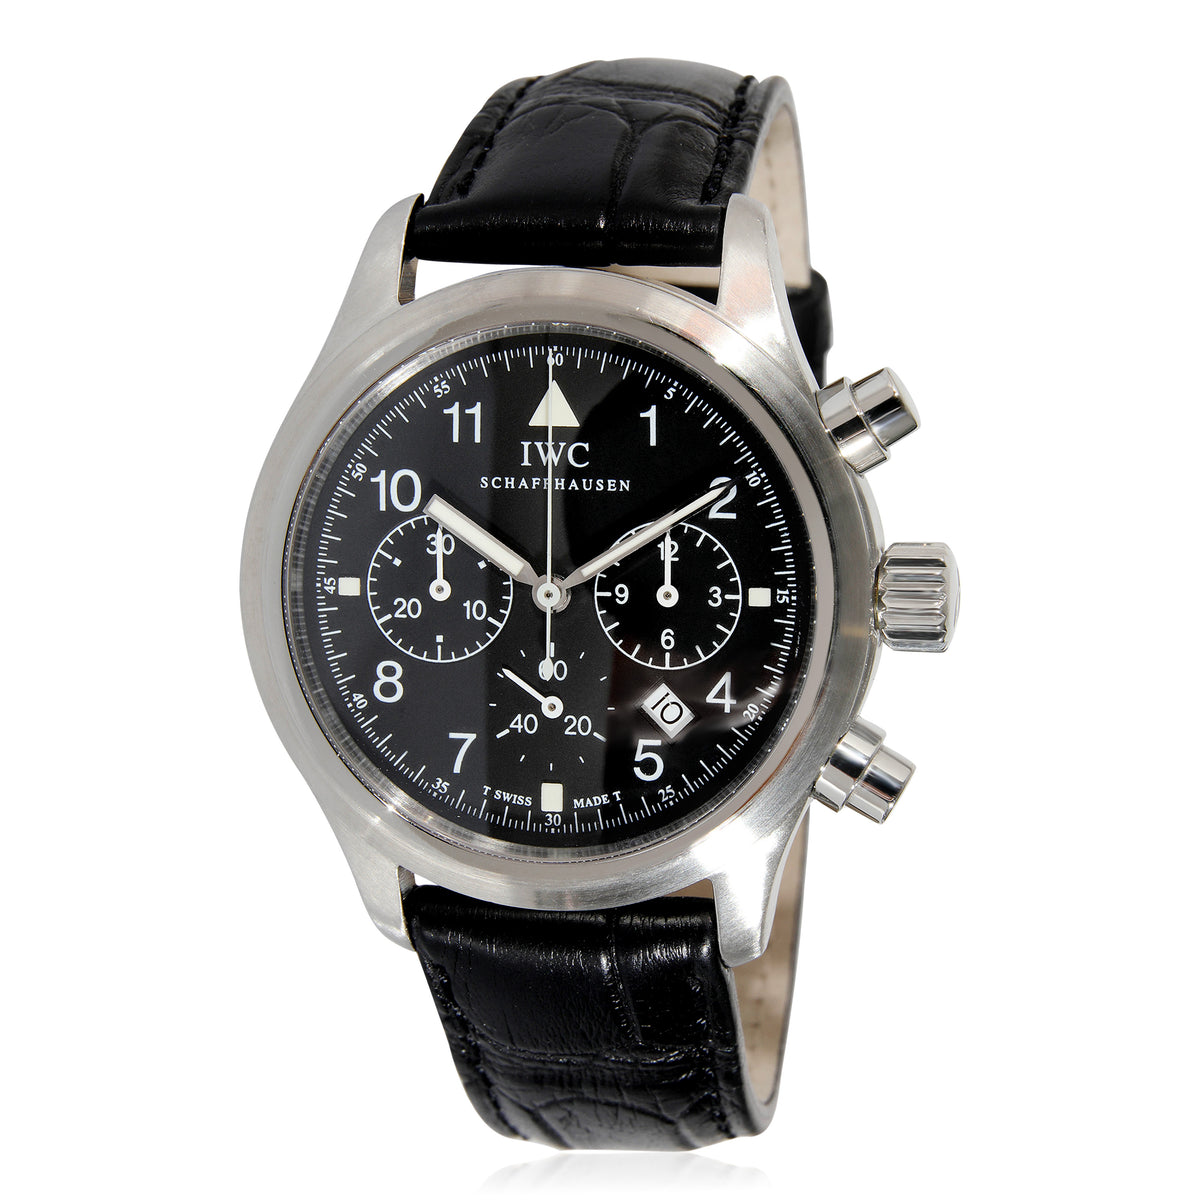 IWC Pilot Chronograph IW374101 Unisex Watch in  Stainless Steel